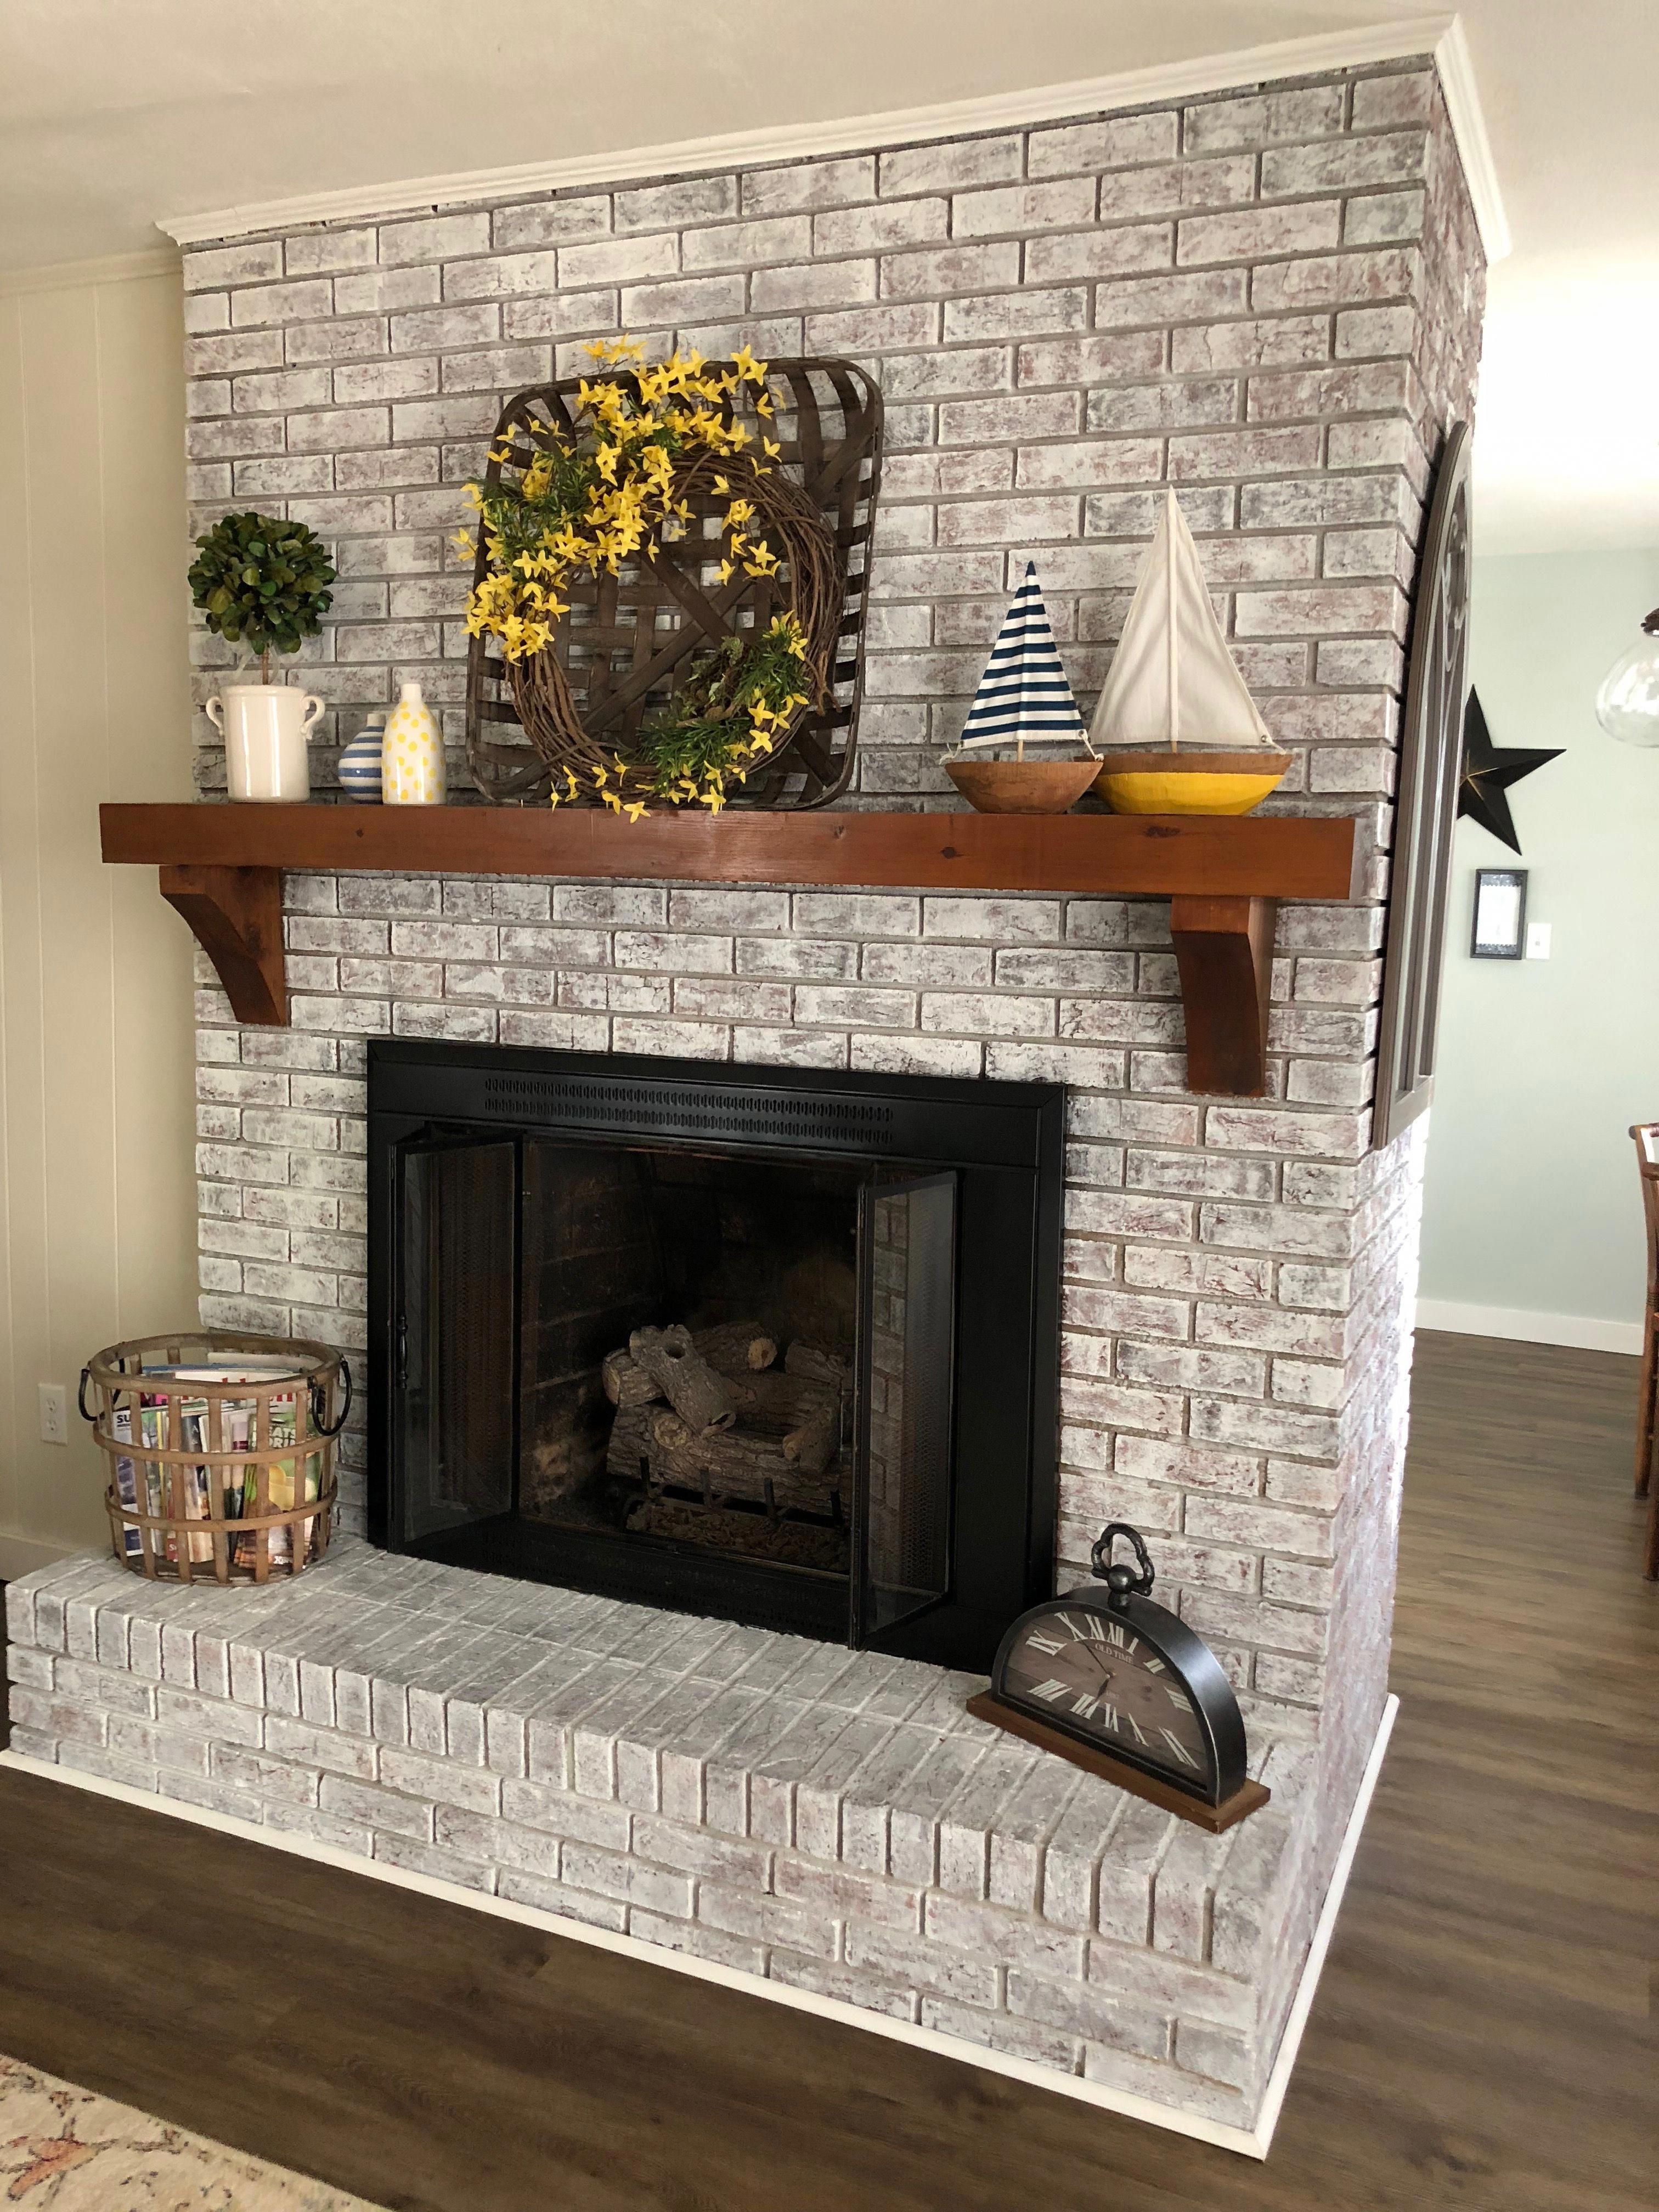 Target Electric Fireplace Luxury Painted Brick Fireplace Sw Pure White Over Dark Red Brick